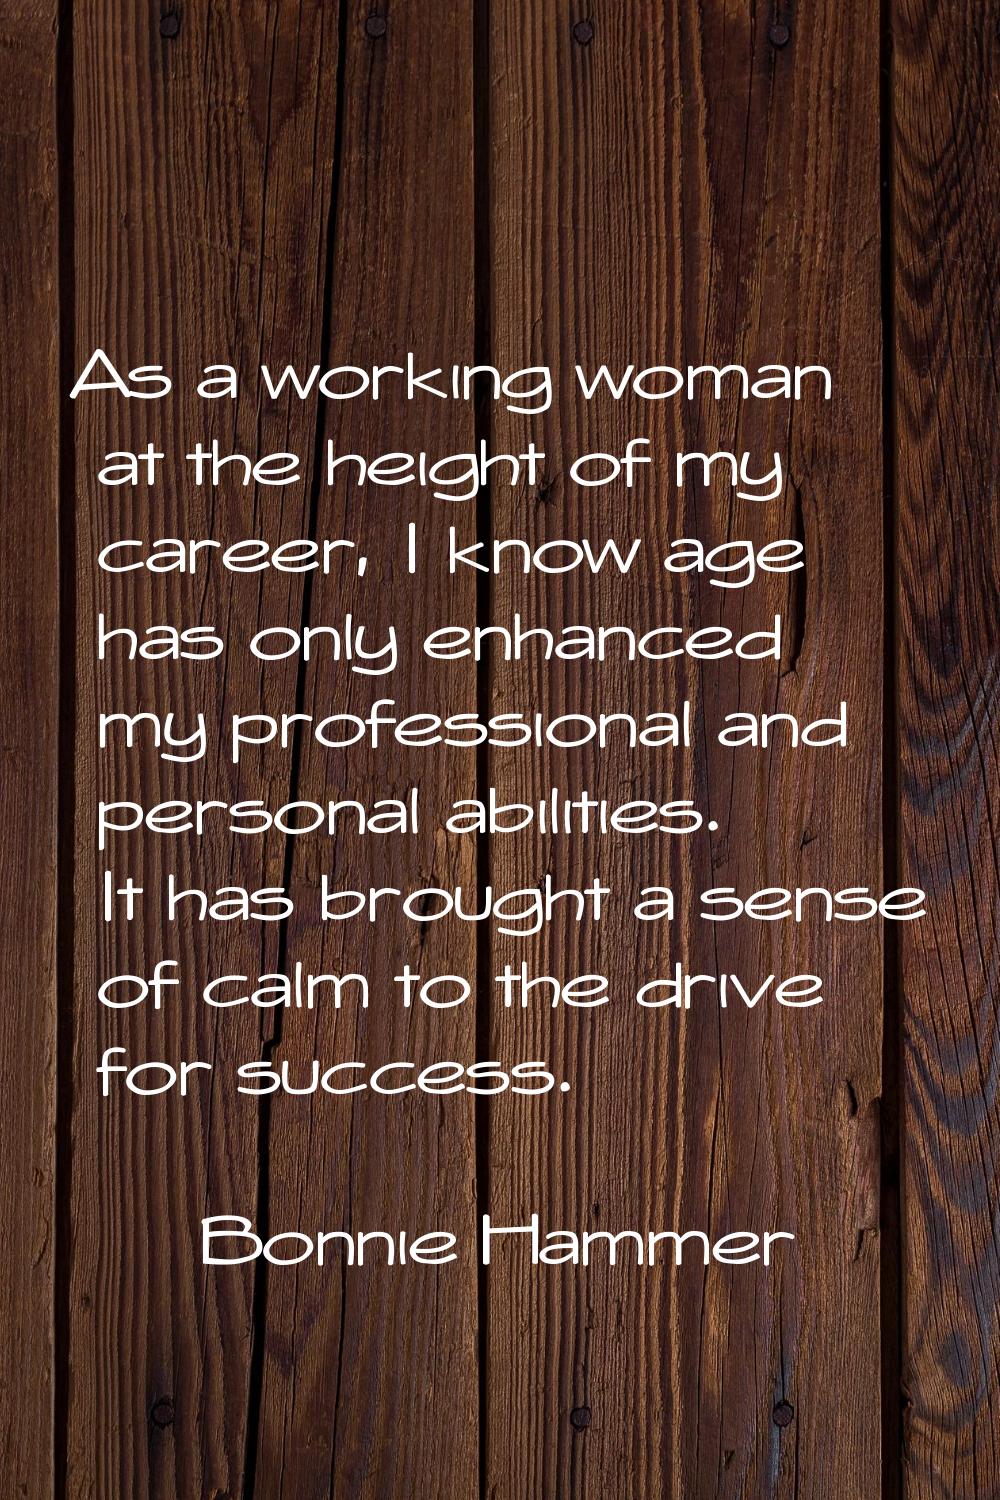 As a working woman at the height of my career, I know age has only enhanced my professional and per